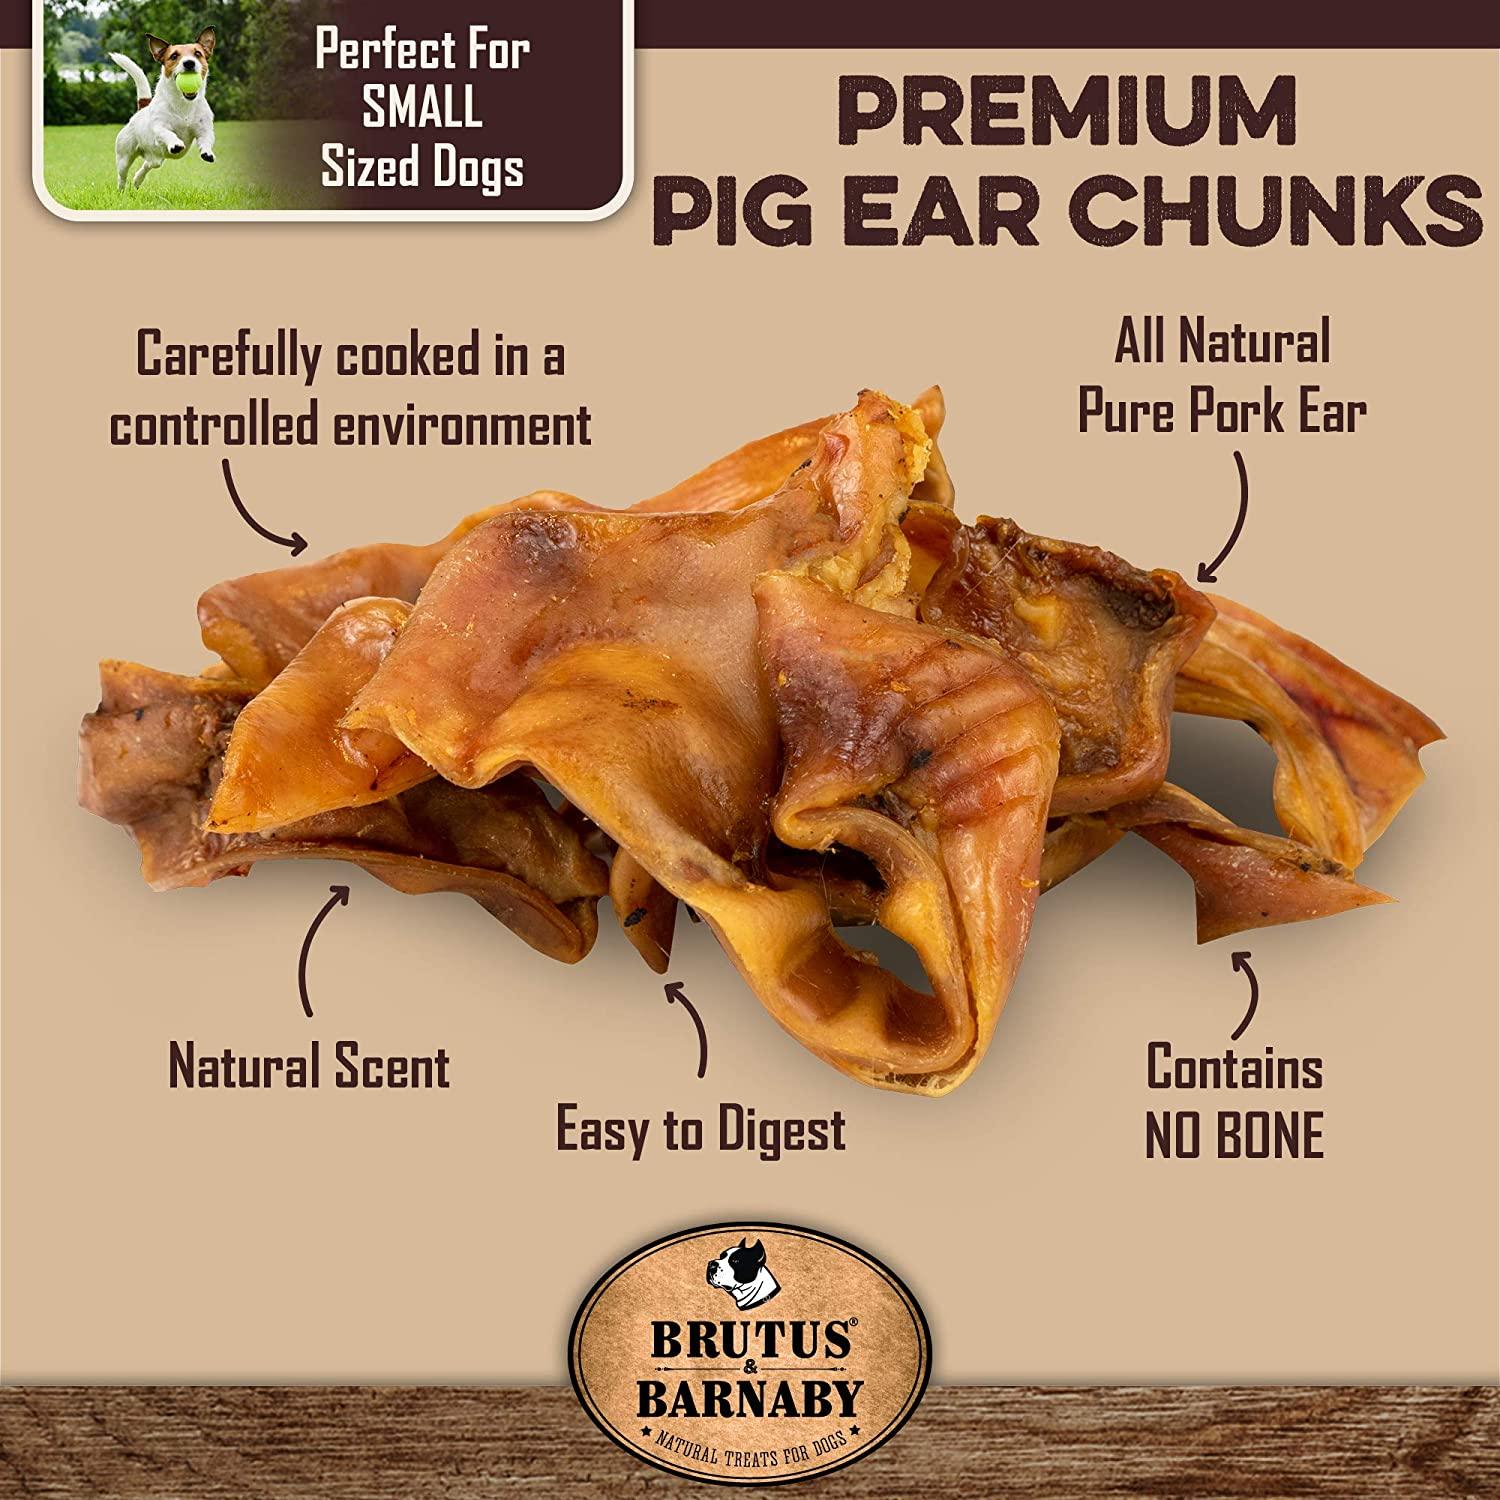 Brutus & Barnaby Premium Pig Ear Chunks - Healthy Treats To Give Dogs